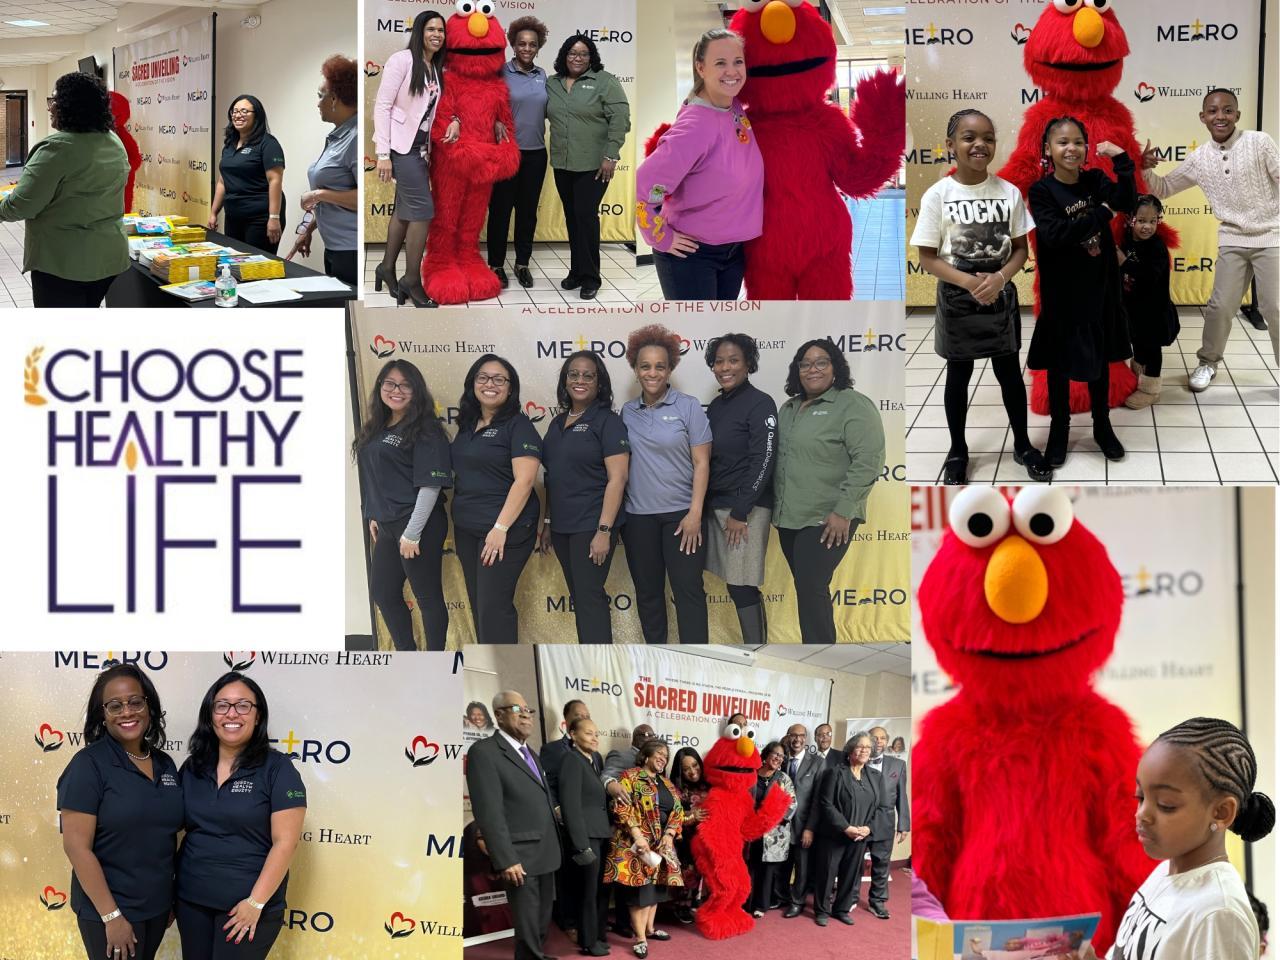 Collage of pictures from the Choose Healthy Life event, some featuring a person dressed as Elmo.